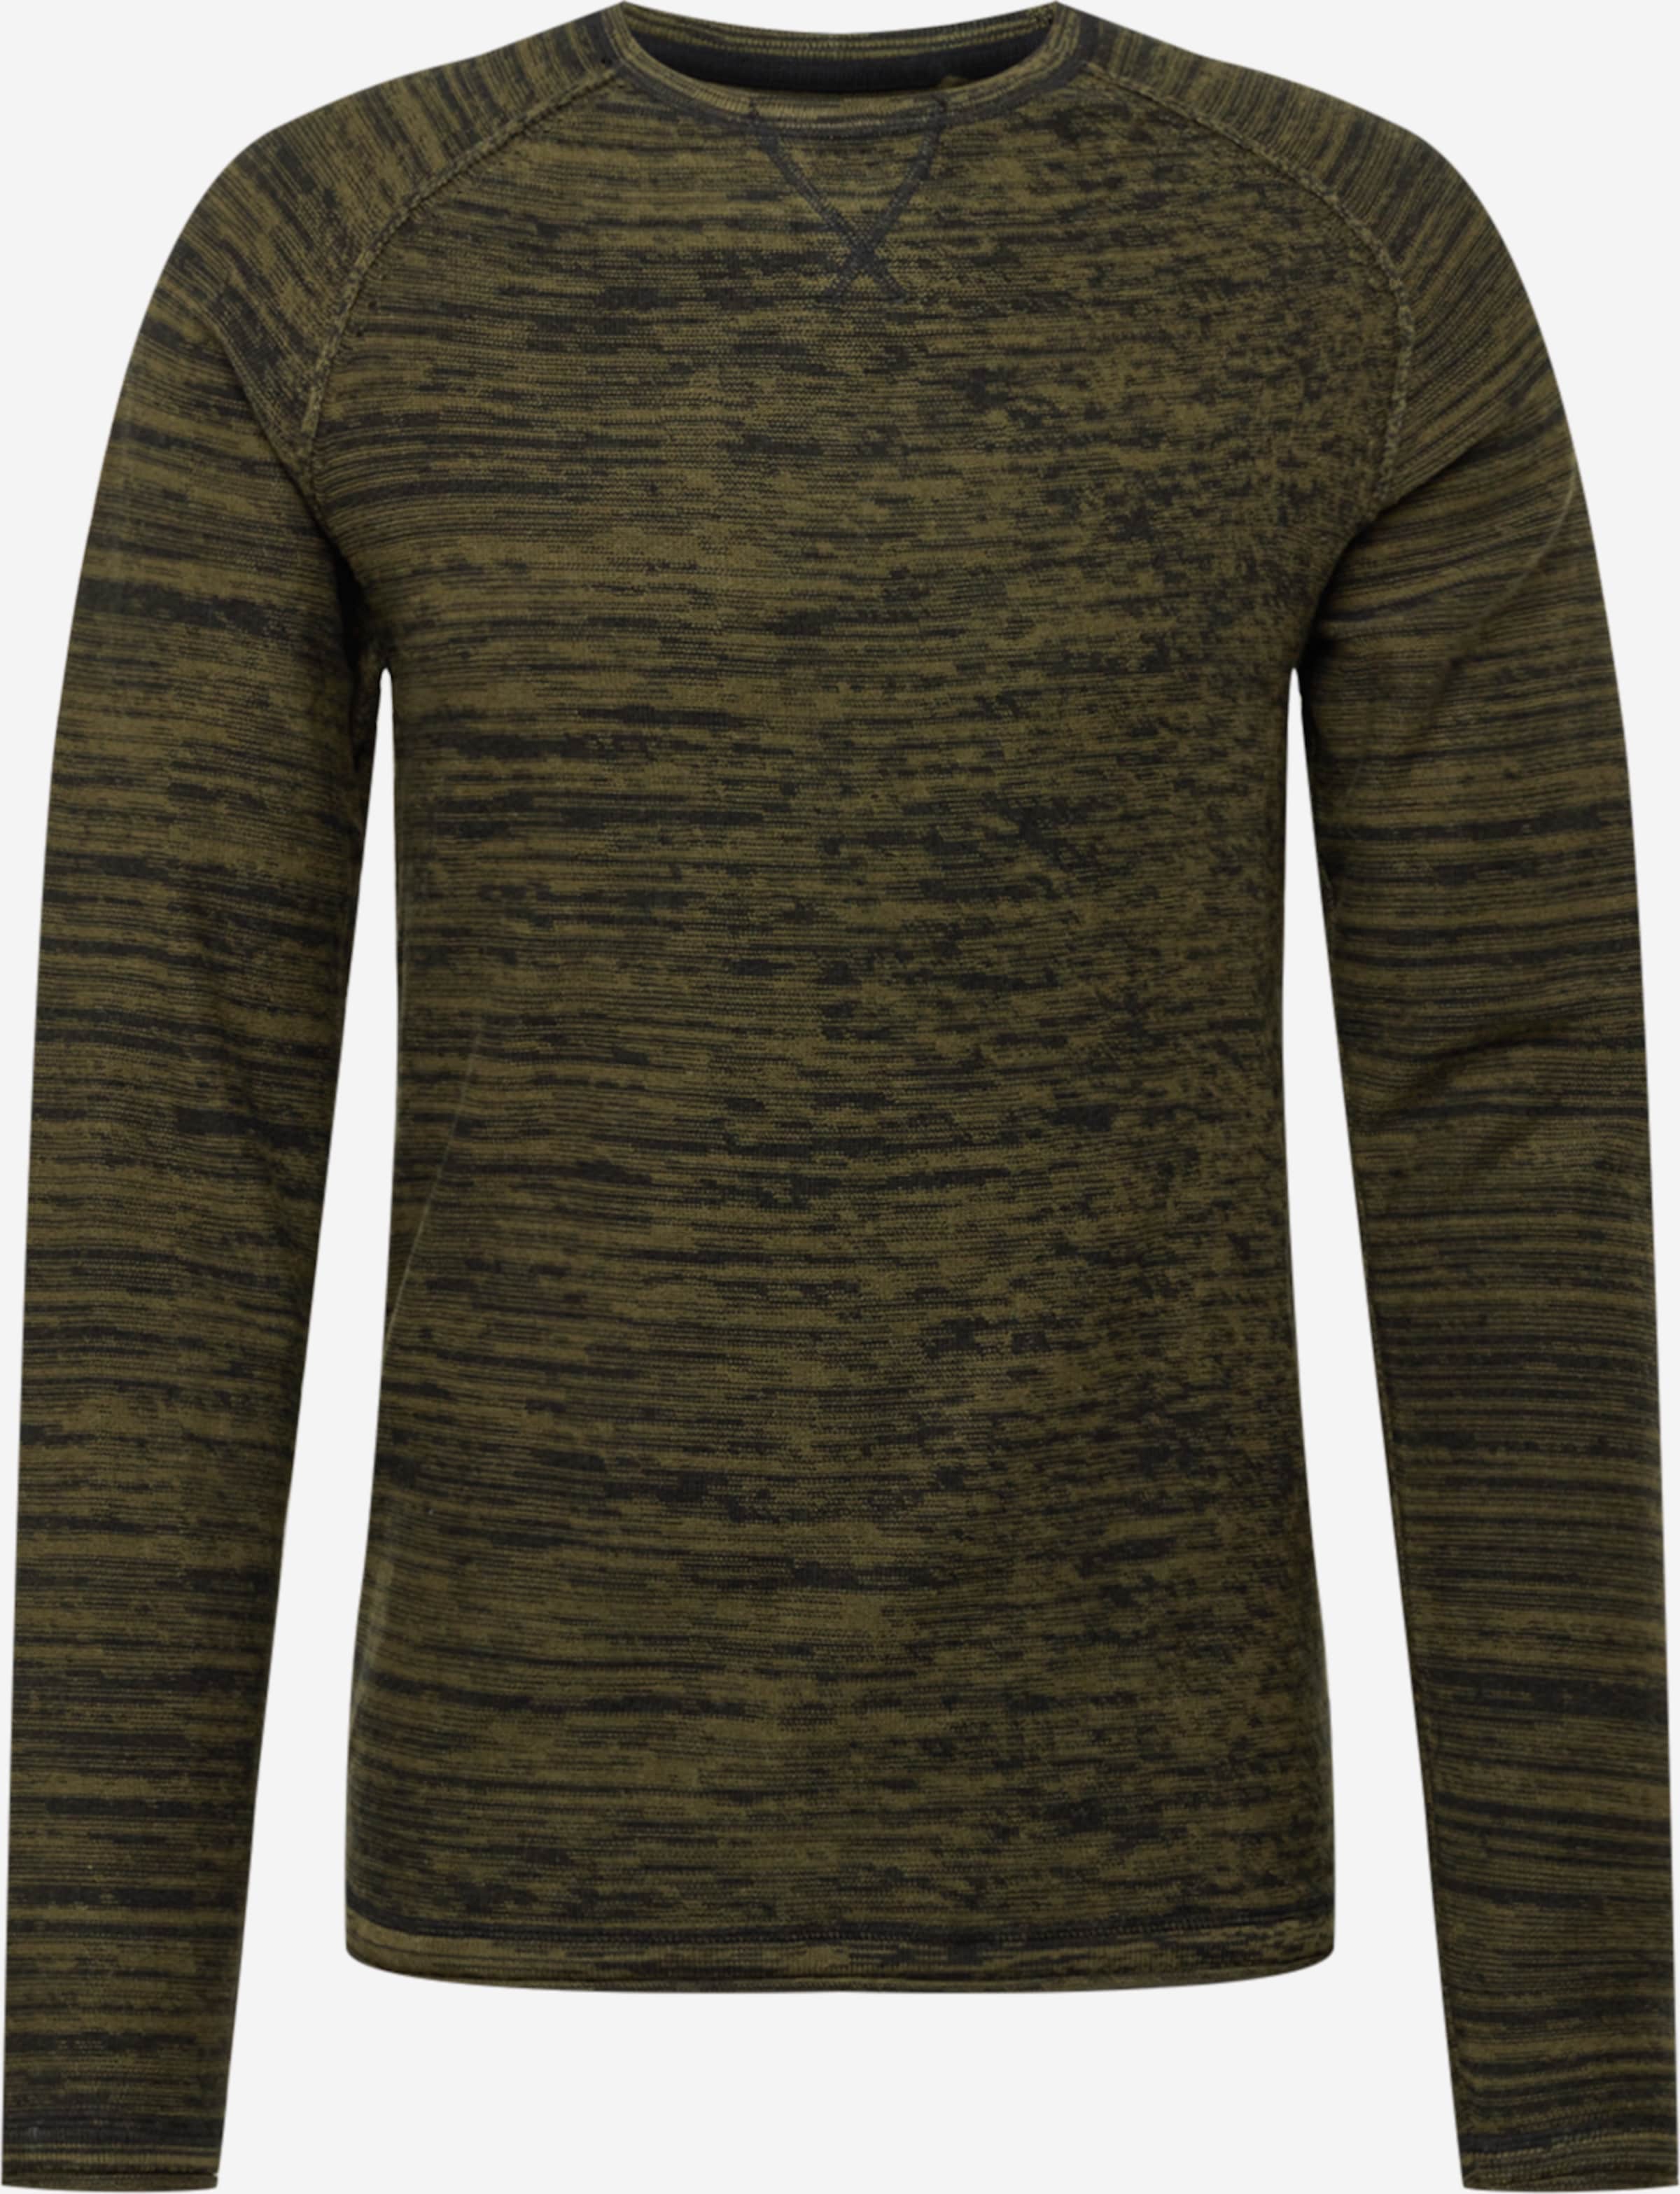 ABOUT Pullover YOU | BLEND in Grünmeliert Oliv,